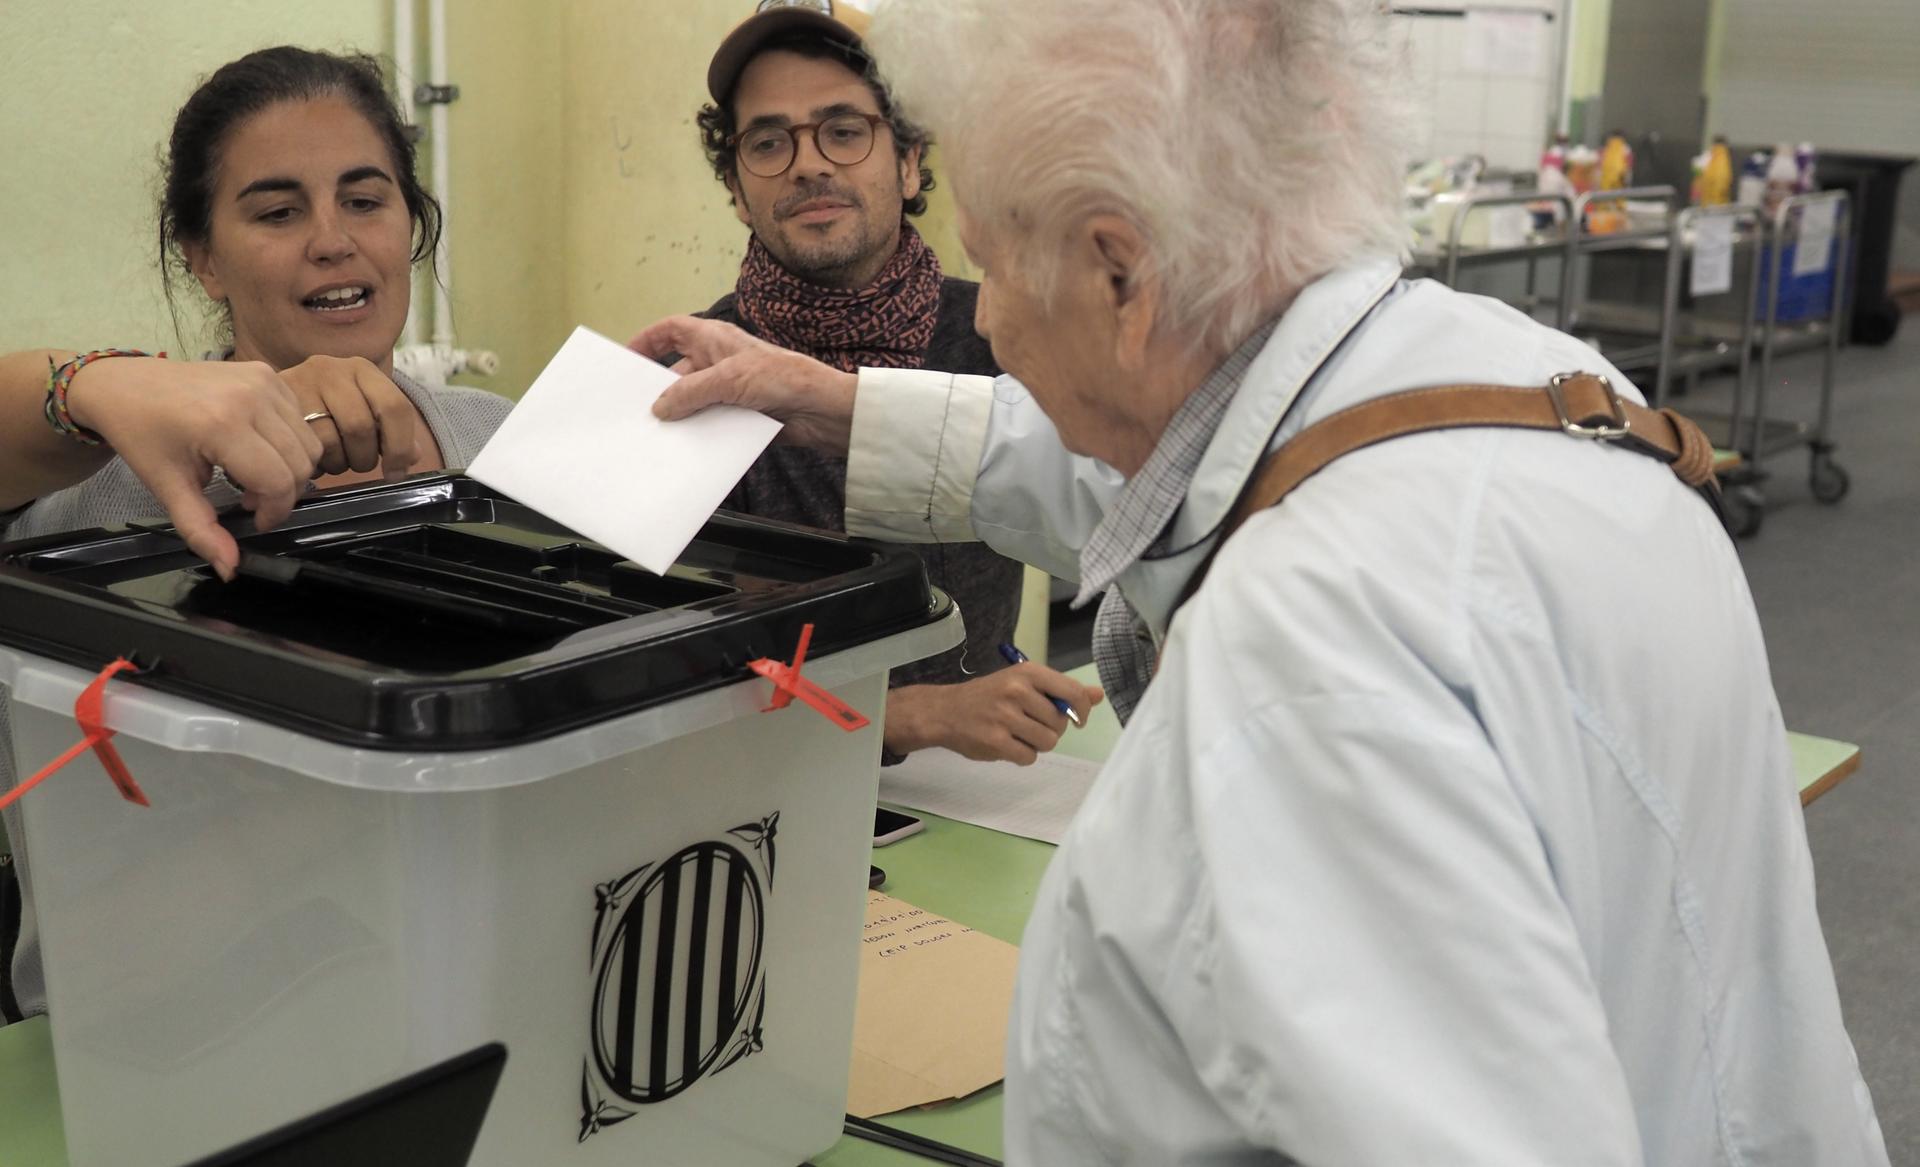 A voter partakes in a risky endeavor: casting a ballot in Catalonia's outlawed referendum for independence from Spain.